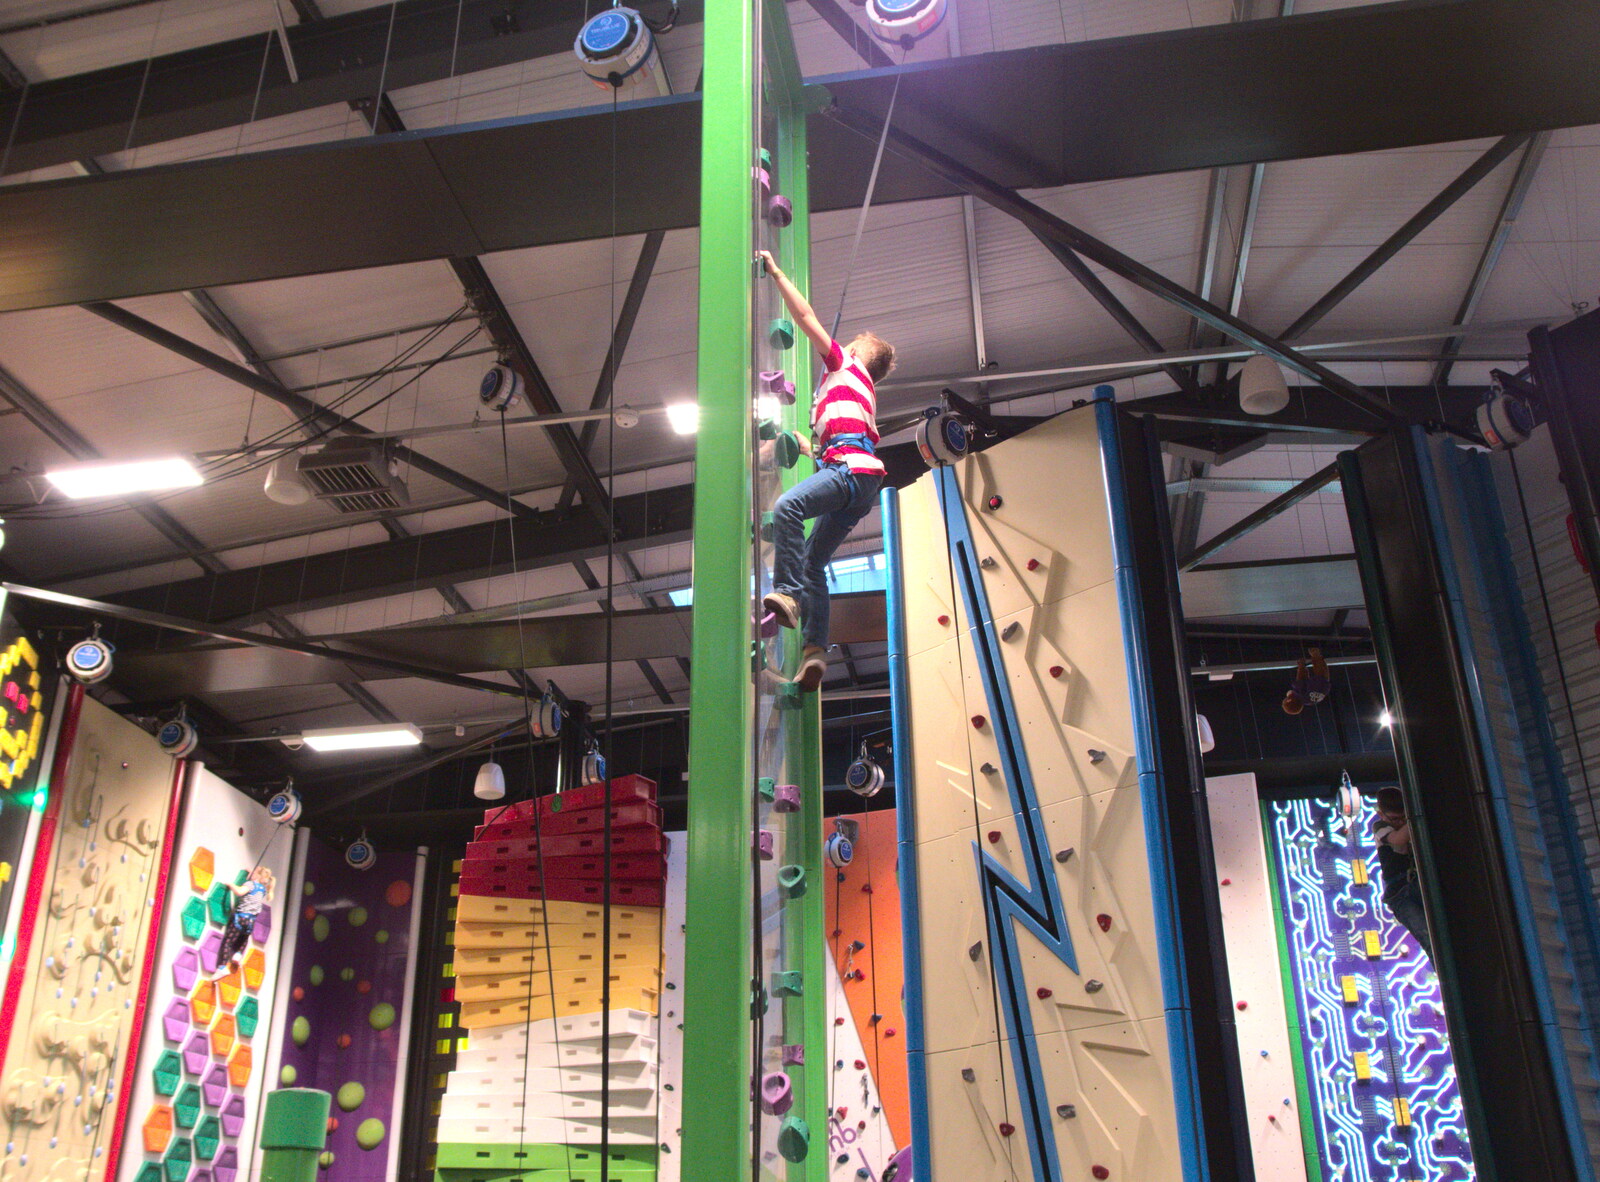 Jacob makes it almost to the ceiling from Clip and Climb, The Havens, Ipswich - 15th February 2020